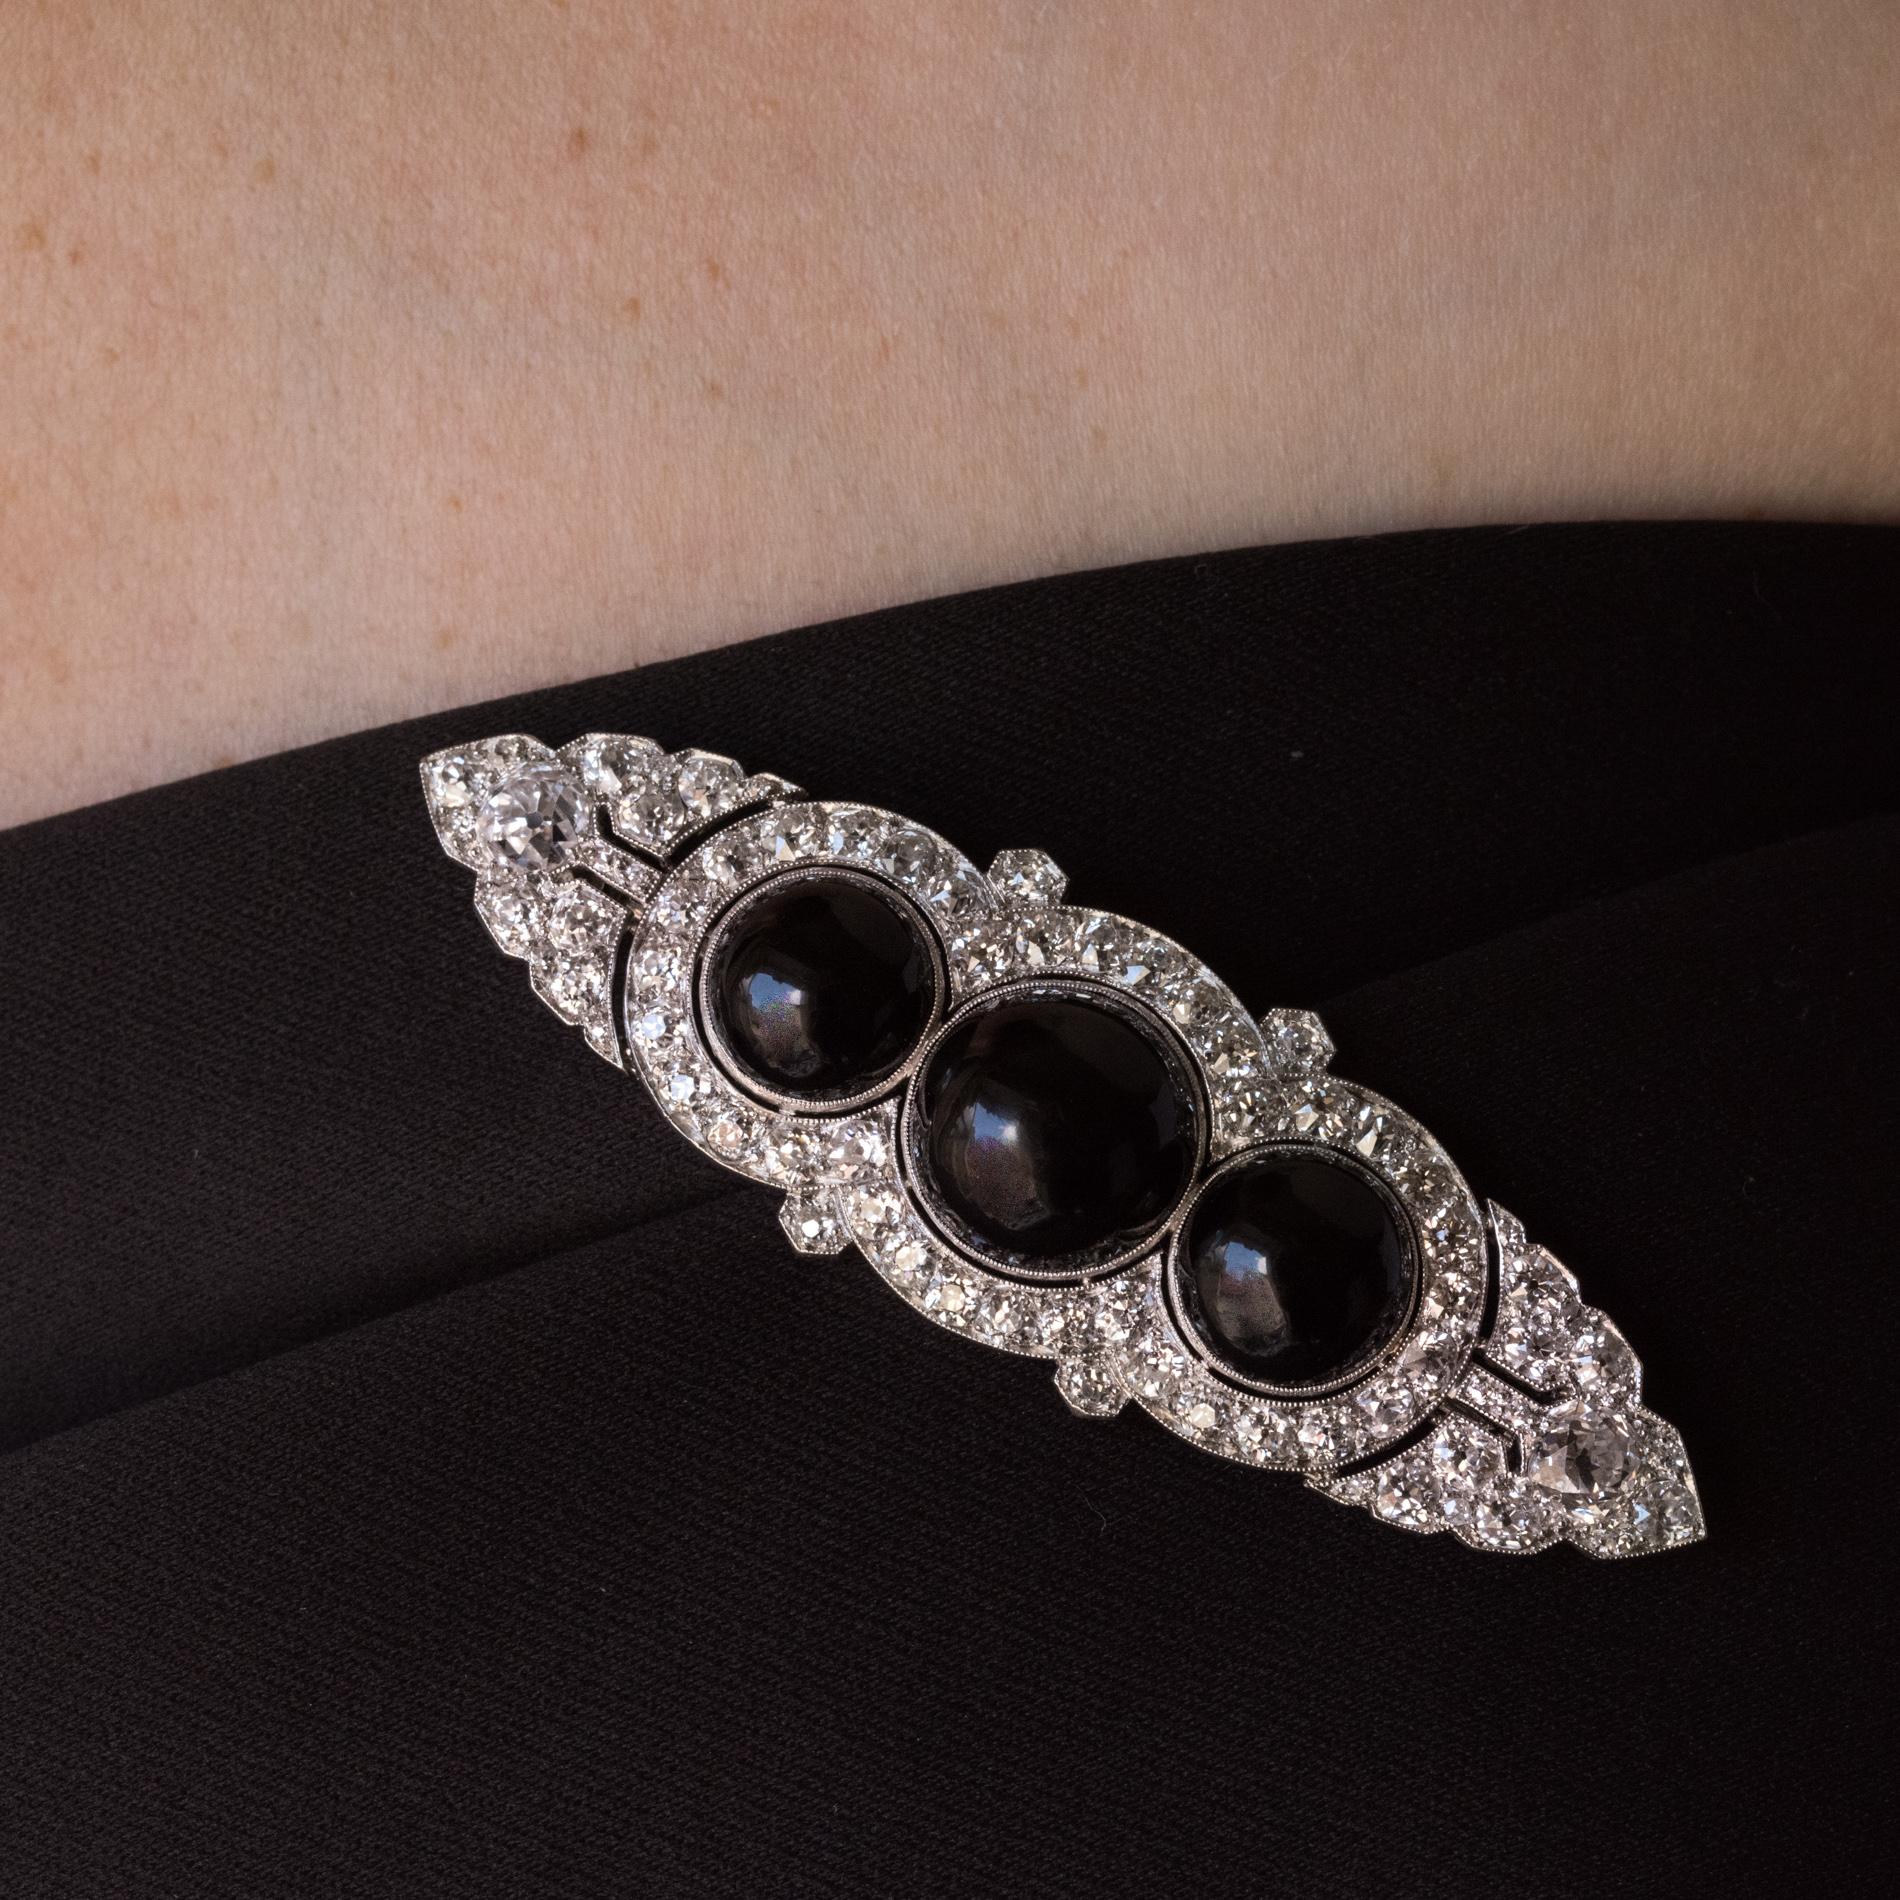 Brooch in platinum and 18 carat, white gold.

Adorned with 3 onyx cabochons in an openwork bezel setting surrounded by antique cut diamonds. 

Principal Onyx: diameter 12.5 mm, side 2: diameter 9.8 mm.
Total weight of diamonds: 4.40 carat